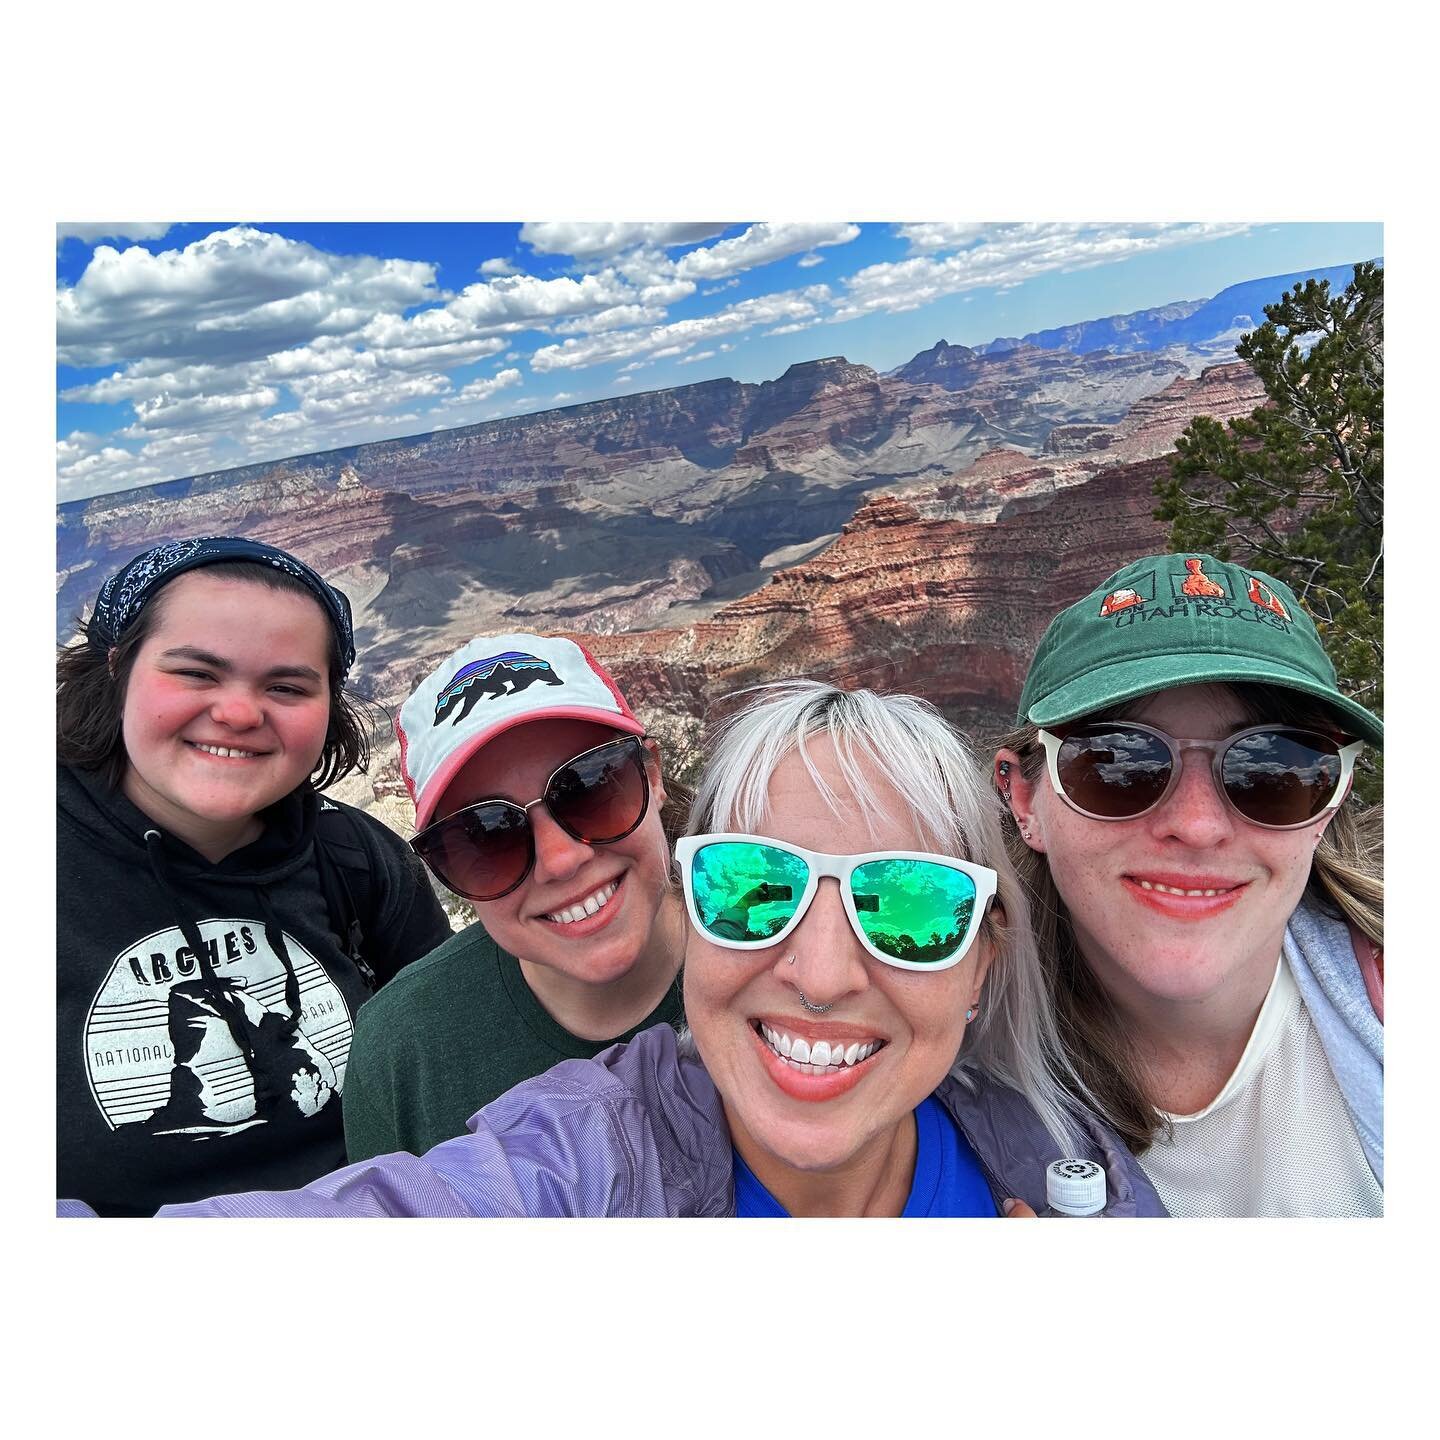 Summer Field Study: Day 9 - The Grand Canyon. Our last stop before heading home. After taking our final exam, we finally got to relax and celebrate around the campfire - @alicesaccount made a delicious apple tart for us to share on our last night tog